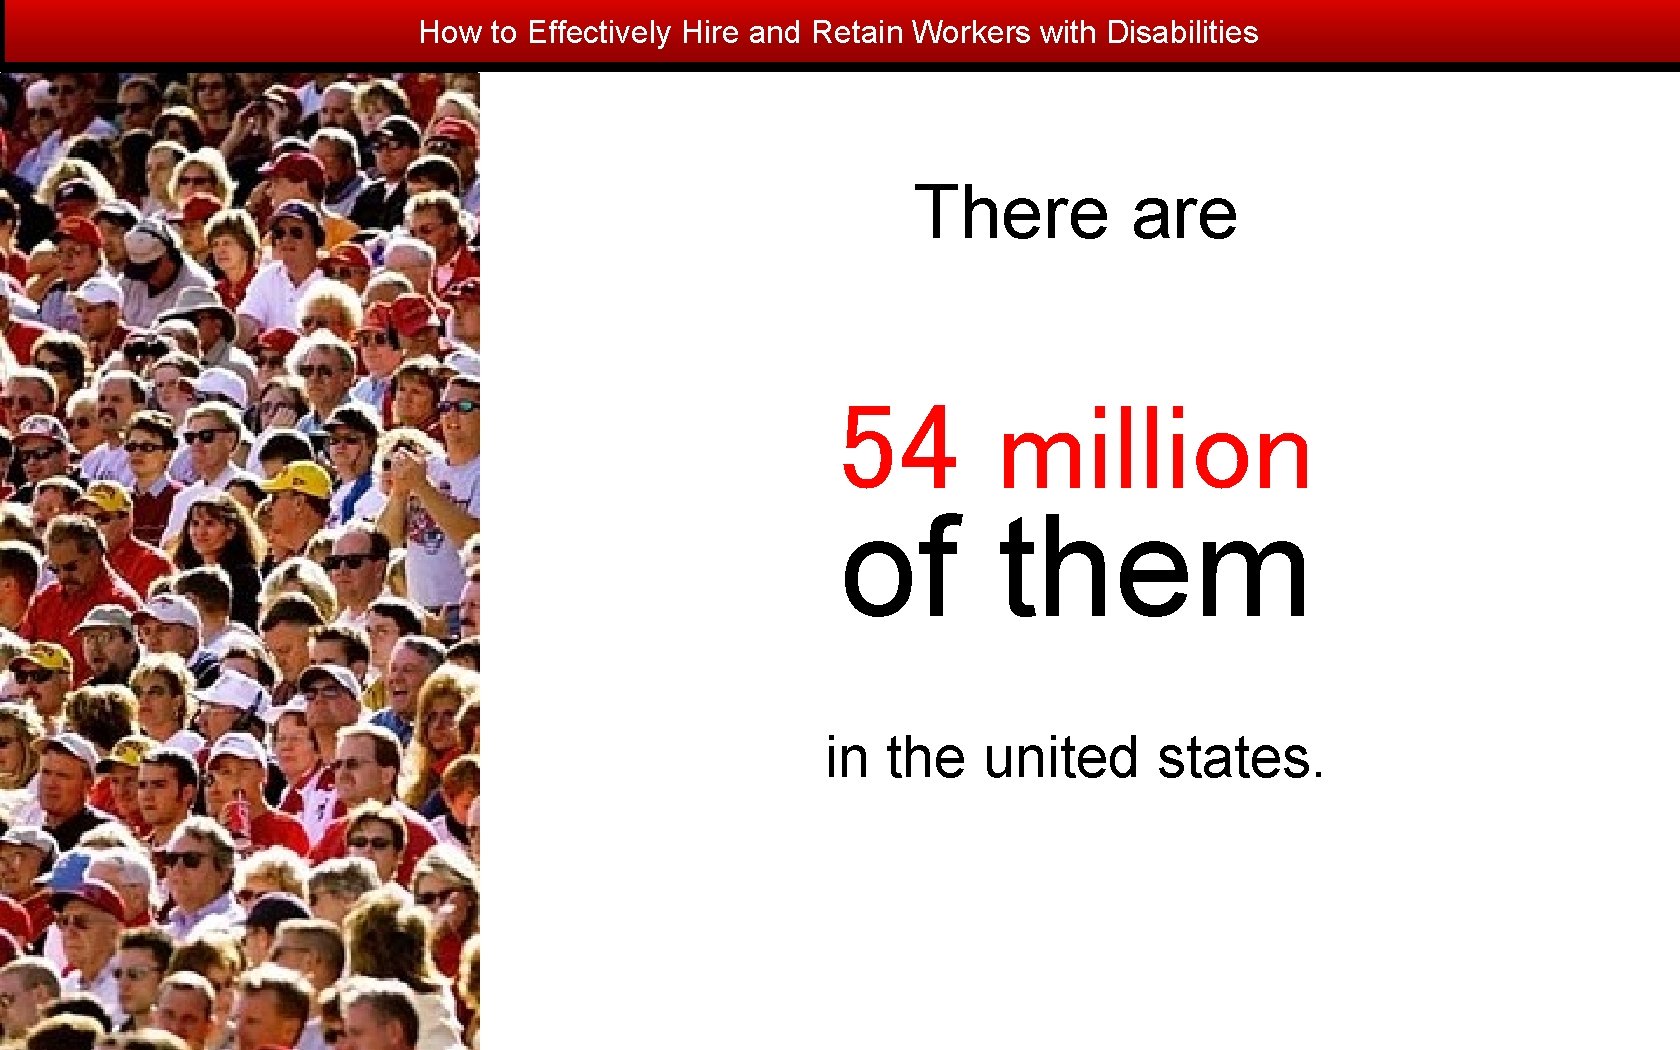 How to Effectively Hire and Retain Workers with Disabilities There are 54 million of